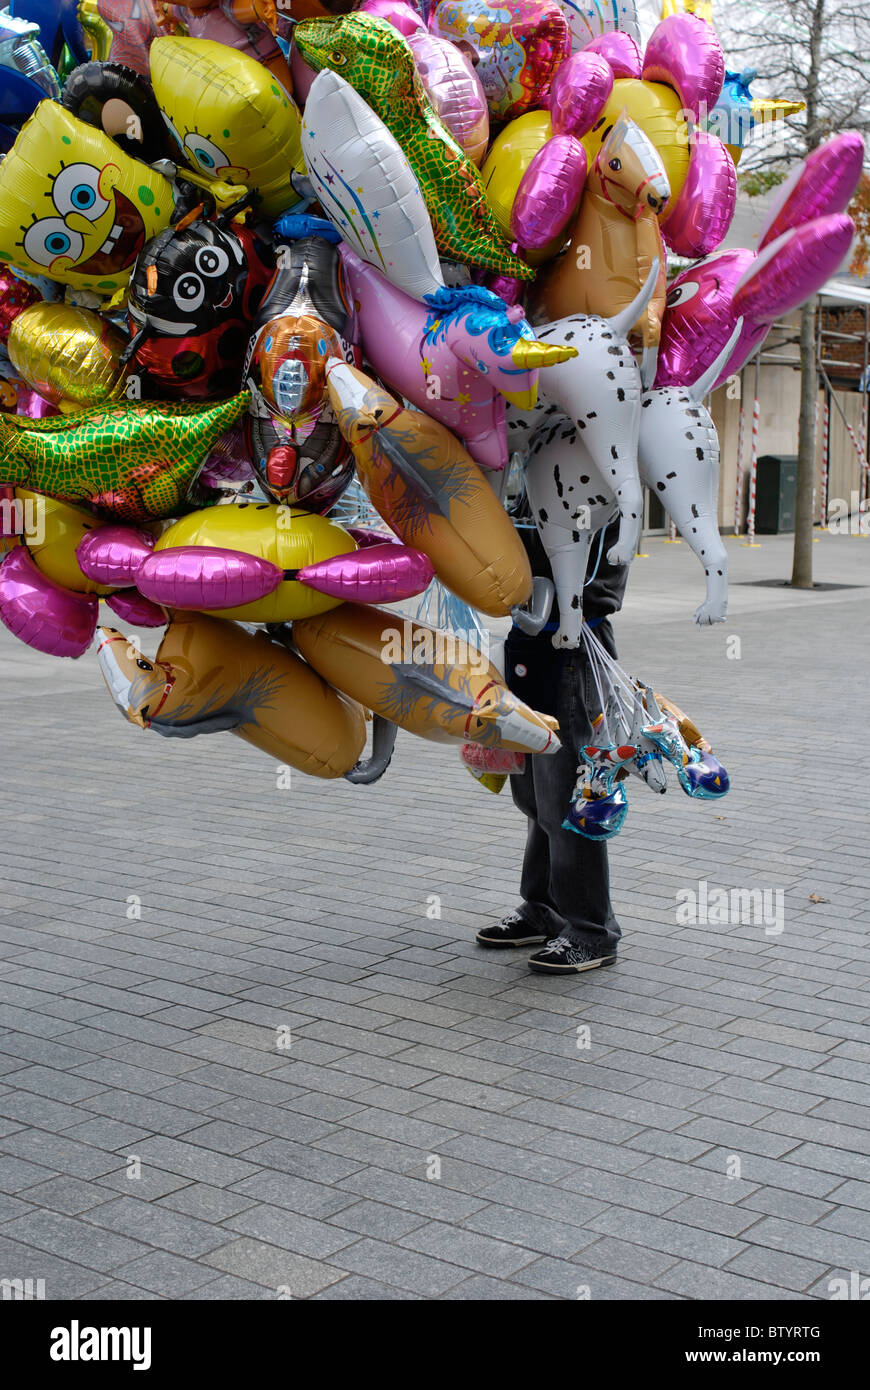 Balloon seller obscured by his wares. Stock Photo